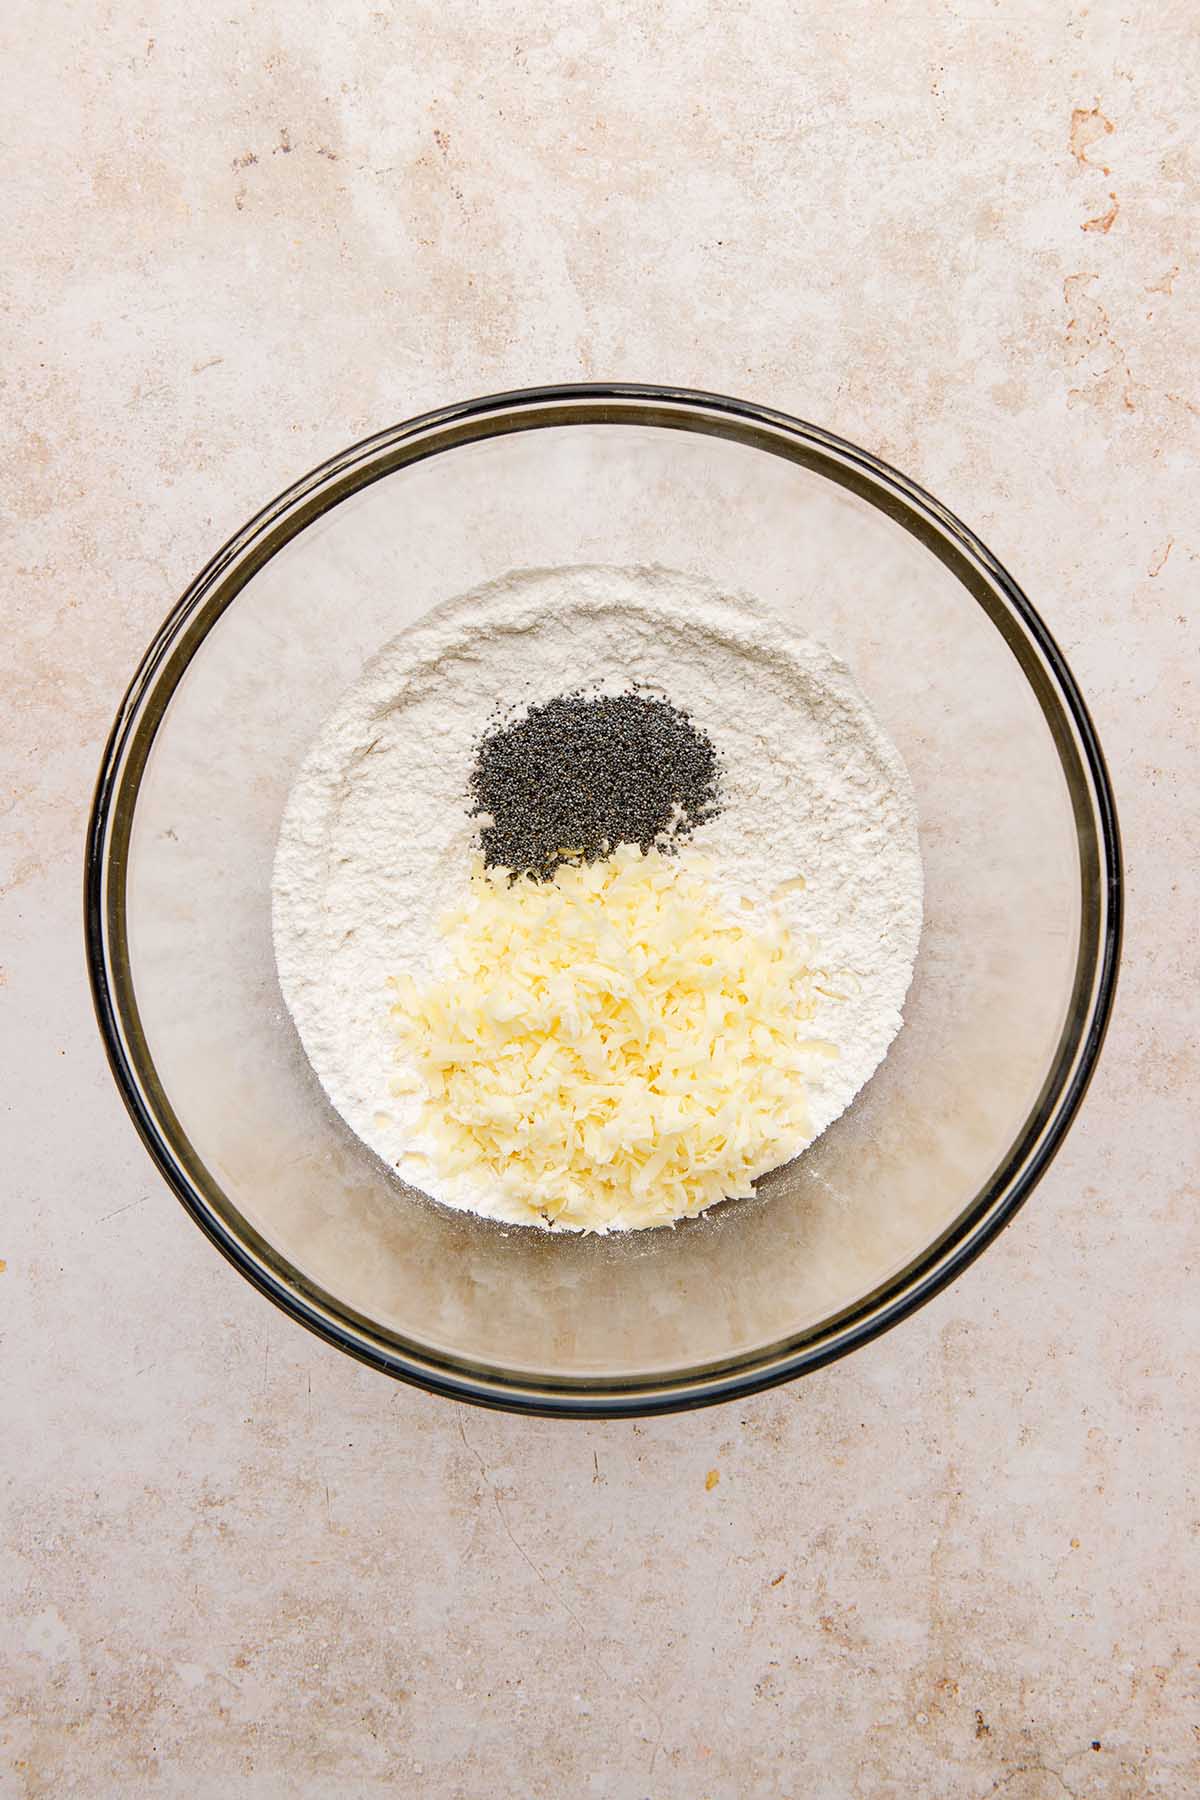 A bowl of flour with shredded cheese and poppy seeds on top.